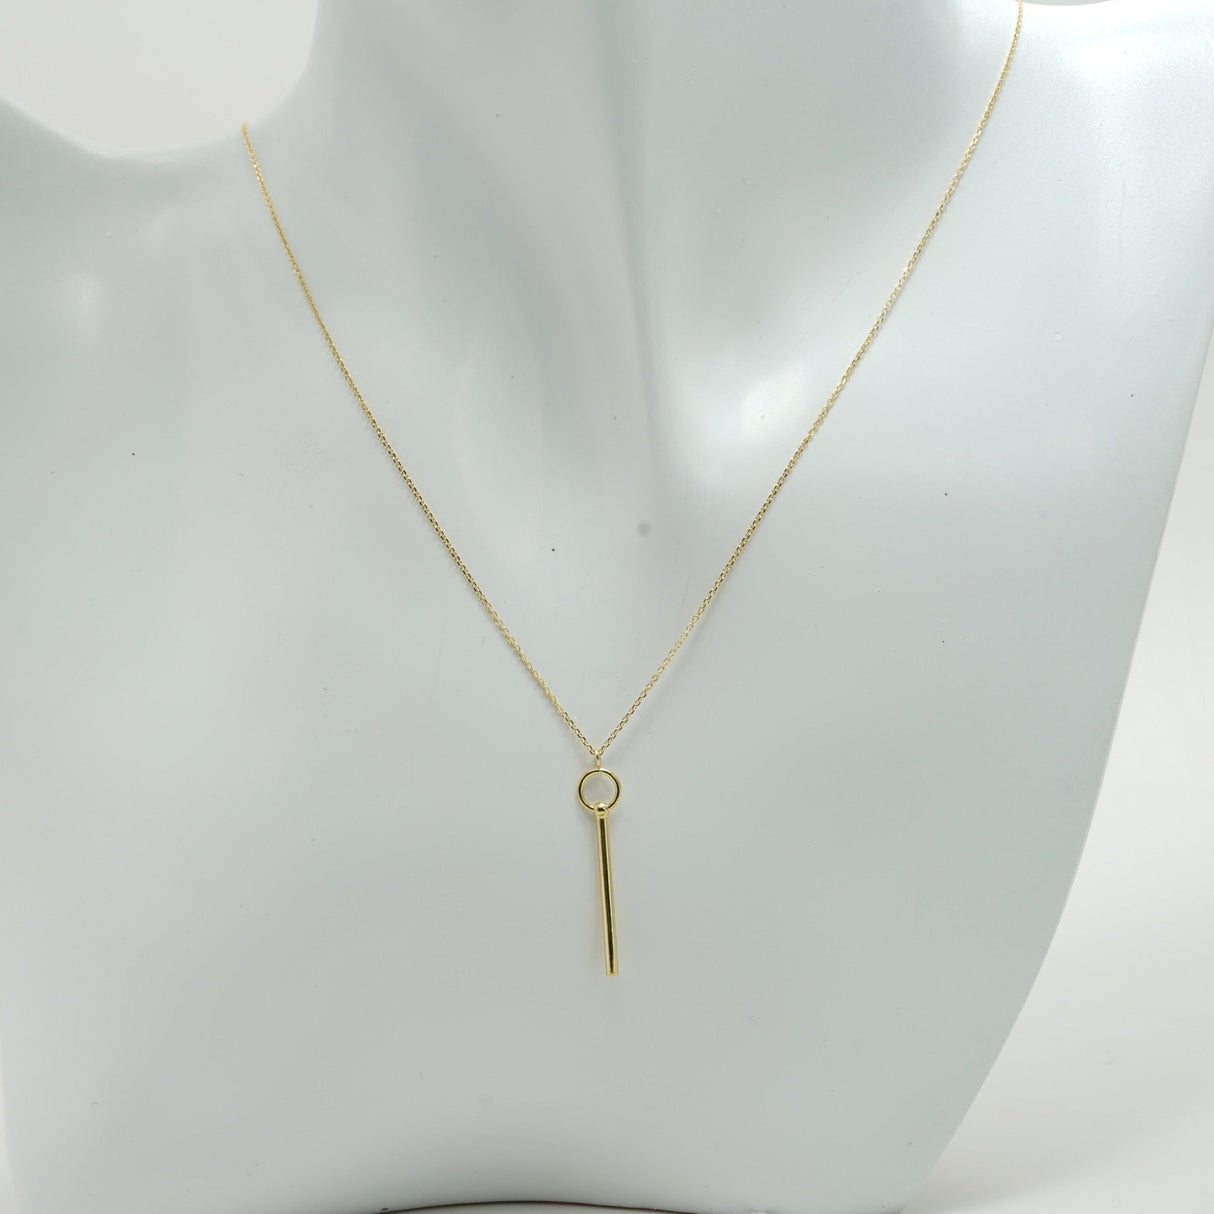 14K Gold Necklace, Adjustable Tube Necklace, Fashion and Trendy Necklace,  Add timeless fashion to any ensemble with this 14K Gold Necklace from Diamond Origin. An adjustable tube design makes it easy to wear, and its classic yet trendy style ensures that you look chic and fashionable wherever you go. Ideal for layering and gifting, it's sure to make a beautiful addition to any jewelry collection.  Elegant and fashionable stackable gold necklace, trendy gold necklace for all occasions gift,